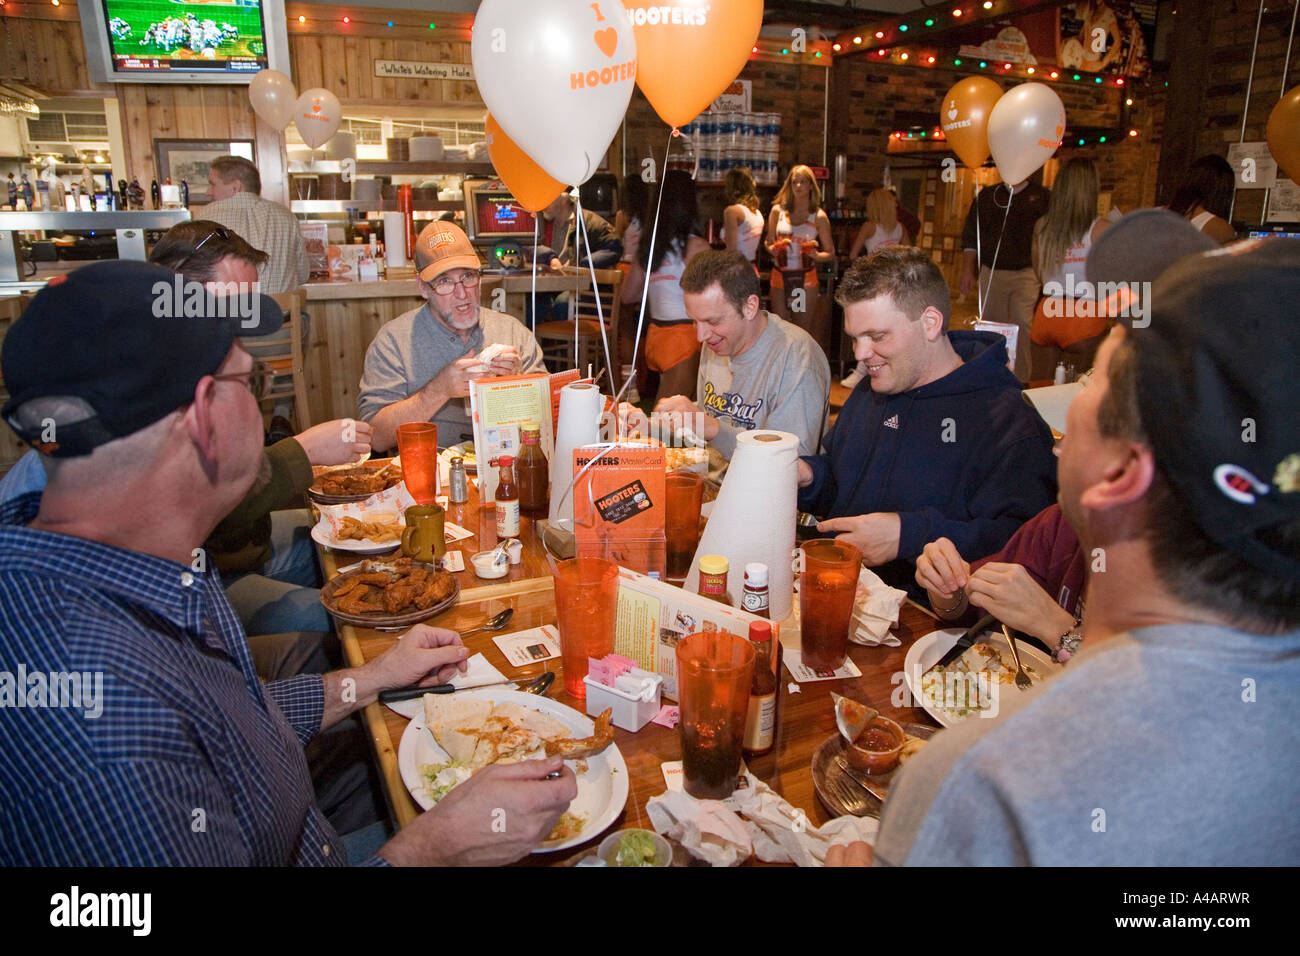 Troy Michigan Customers eat lunch during the grand opening of a Hooters restaurant Stock Photo